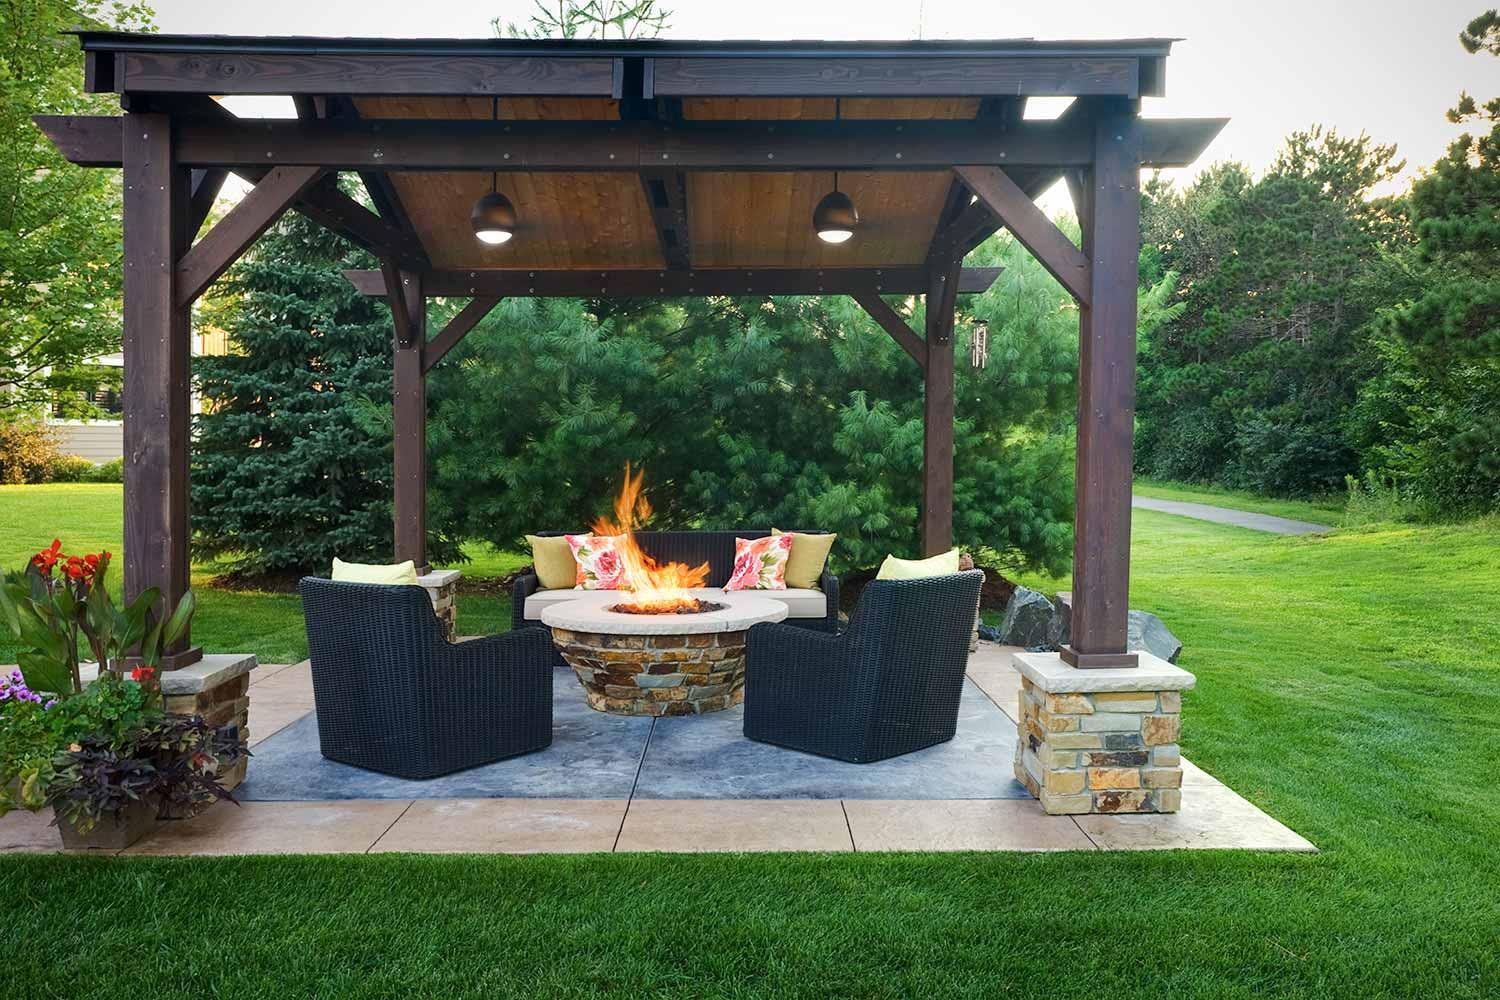 Stone Paver Fire Pits Fireplaces And, Can I Put A Gas Fire Pit Under Gazebo